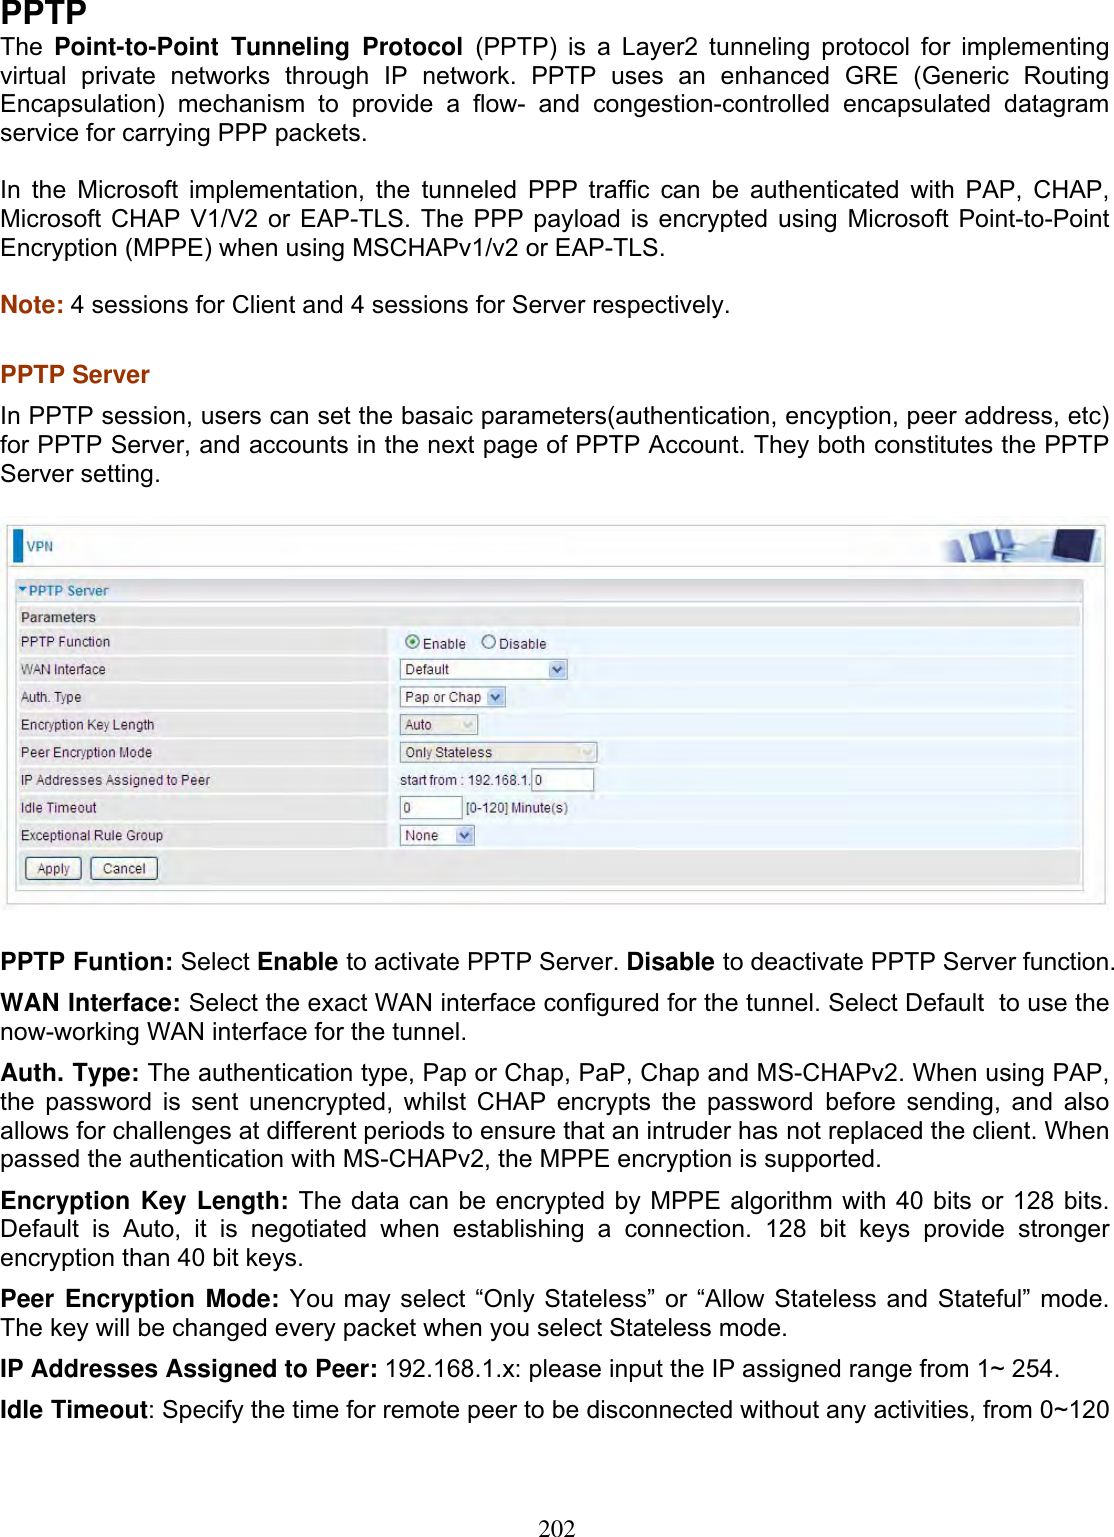 202PPTPThe Point-to-Point Tunneling Protocol (PPTP) is a Layer2 tunneling protocol for implementing virtual private networks through IP network. PPTP uses an enhanced GRE (Generic Routing Encapsulation) mechanism to provide a flow- and congestion-controlled encapsulated datagram service for carrying PPP packets.  In the Microsoft implementation, the tunneled PPP traffic can be authenticated with PAP, CHAP, Microsoft CHAP V1/V2 or EAP-TLS. The PPP payload is encrypted using Microsoft Point-to-Point Encryption (MPPE) when using MSCHAPv1/v2 or EAP-TLS. Note: 4 sessions for Client and 4 sessions for Server respectively. PPTP Server  In PPTP session, users can set the basaic parameters(authentication, encyption, peer address, etc) for PPTP Server, and accounts in the next page of PPTP Account. They both constitutes the PPTP Server setting. PPTP Funtion: Select Enable to activate PPTP Server. Disable to deactivate PPTP Server function. WAN Interface: Select the exact WAN interface configured for the tunnel. Select Default  to use the now-working WAN interface for the tunnel.Auth. Type: The authentication type, Pap or Chap, PaP, Chap and MS-CHAPv2. When using PAP, the password is sent unencrypted, whilst CHAP encrypts the password before sending, and also allows for challenges at different periods to ensure that an intruder has not replaced the client. When passed the authentication with MS-CHAPv2, the MPPE encryption is supported.Encryption Key Length: The data can be encrypted by MPPE algorithm with 40 bits or 128 bits. Default is Auto, it is negotiated when establishing a connection. 128 bit keys provide stronger encryption than 40 bit keys. Peer Encryption Mode: You may select “Only Stateless” or “Allow Stateless and Stateful” mode. The key will be changed every packet when you select Stateless mode.IP Addresses Assigned to Peer: 192.168.1.x: please input the IP assigned range from 1~ 254. Idle Timeout: Specify the time for remote peer to be disconnected without any activities, from 0~120 